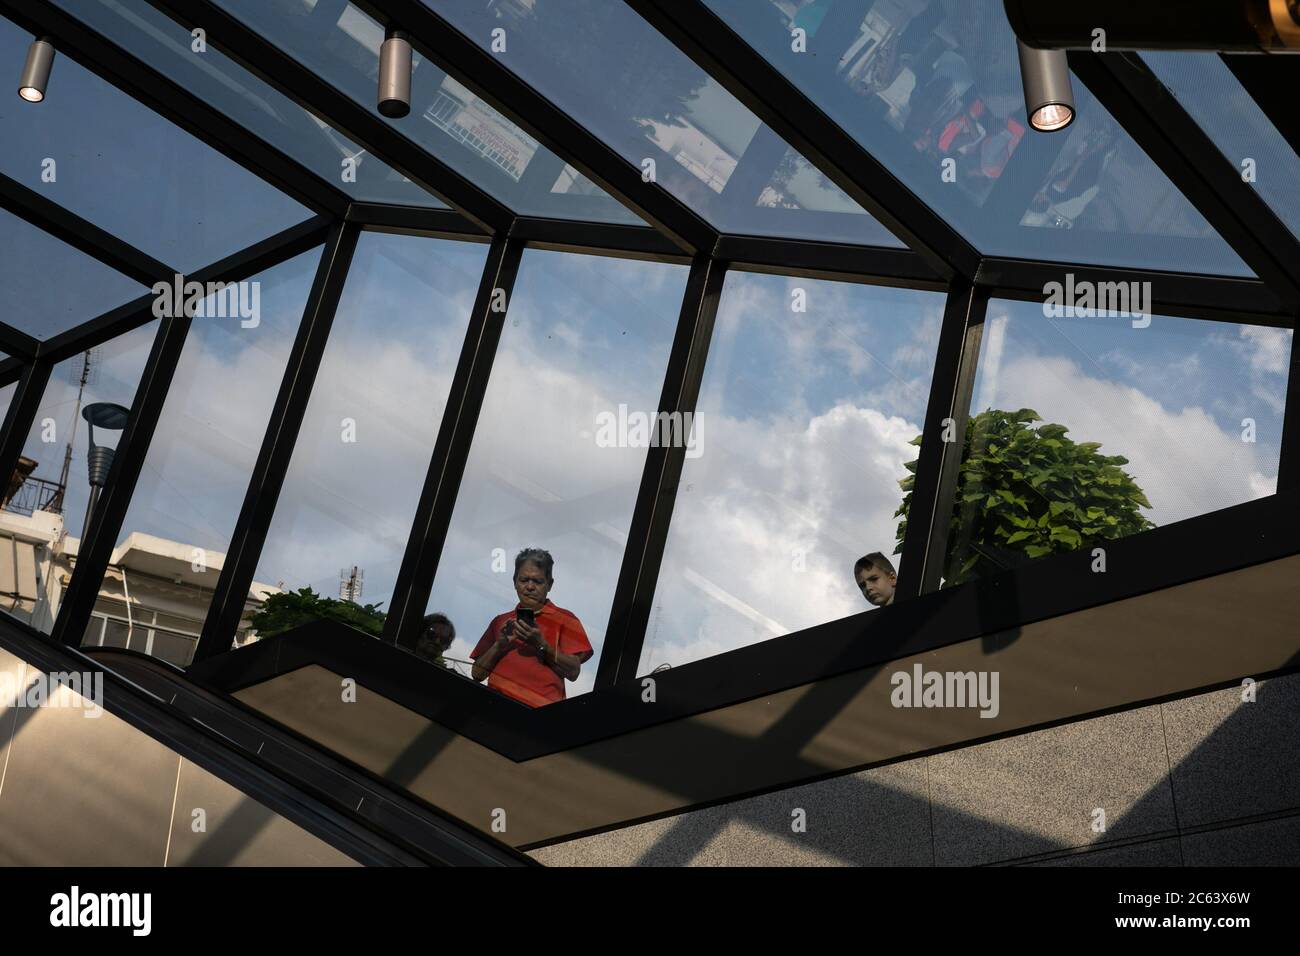 Athens, Greece. 6th July, 2020. People are seen through the glass ceiling  of Nikea metro station in Athens, Greece, July 6, 2020. Greek Prime  Minister Kyriakos Mitsotakis inaugurated on Monday three new